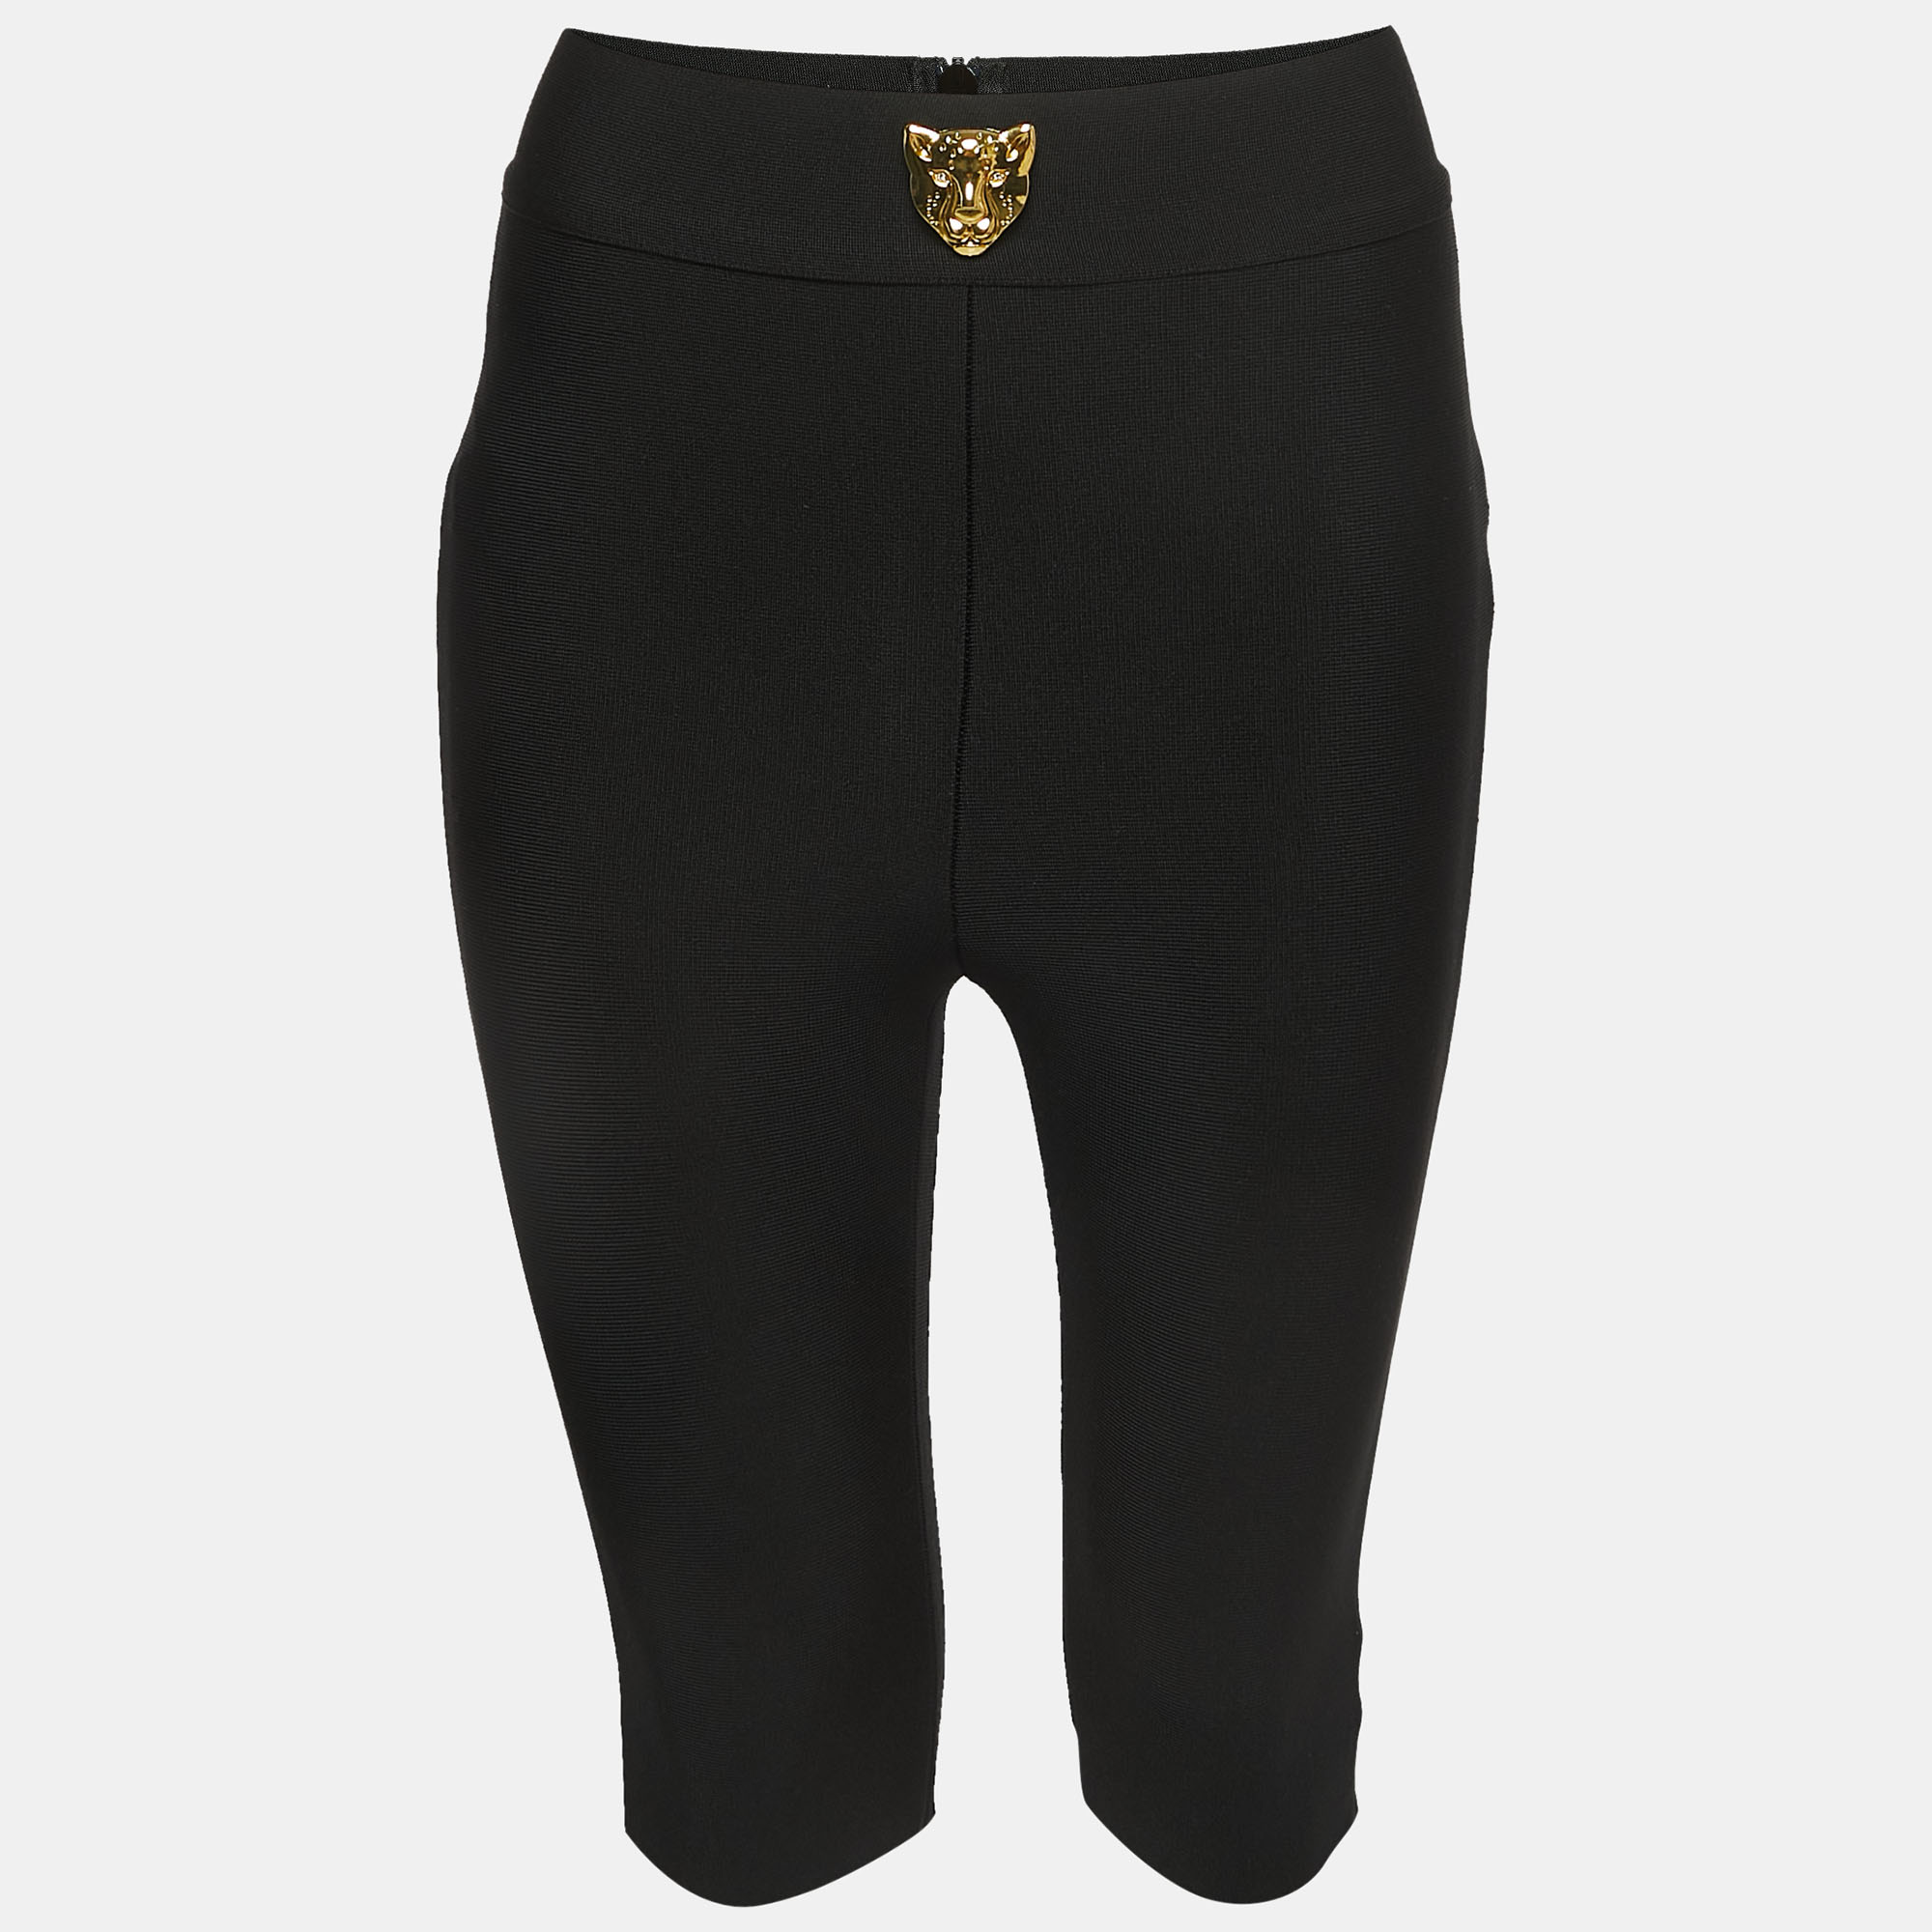 

Dan More Black Knit Iconic Panther Cycling Shorts